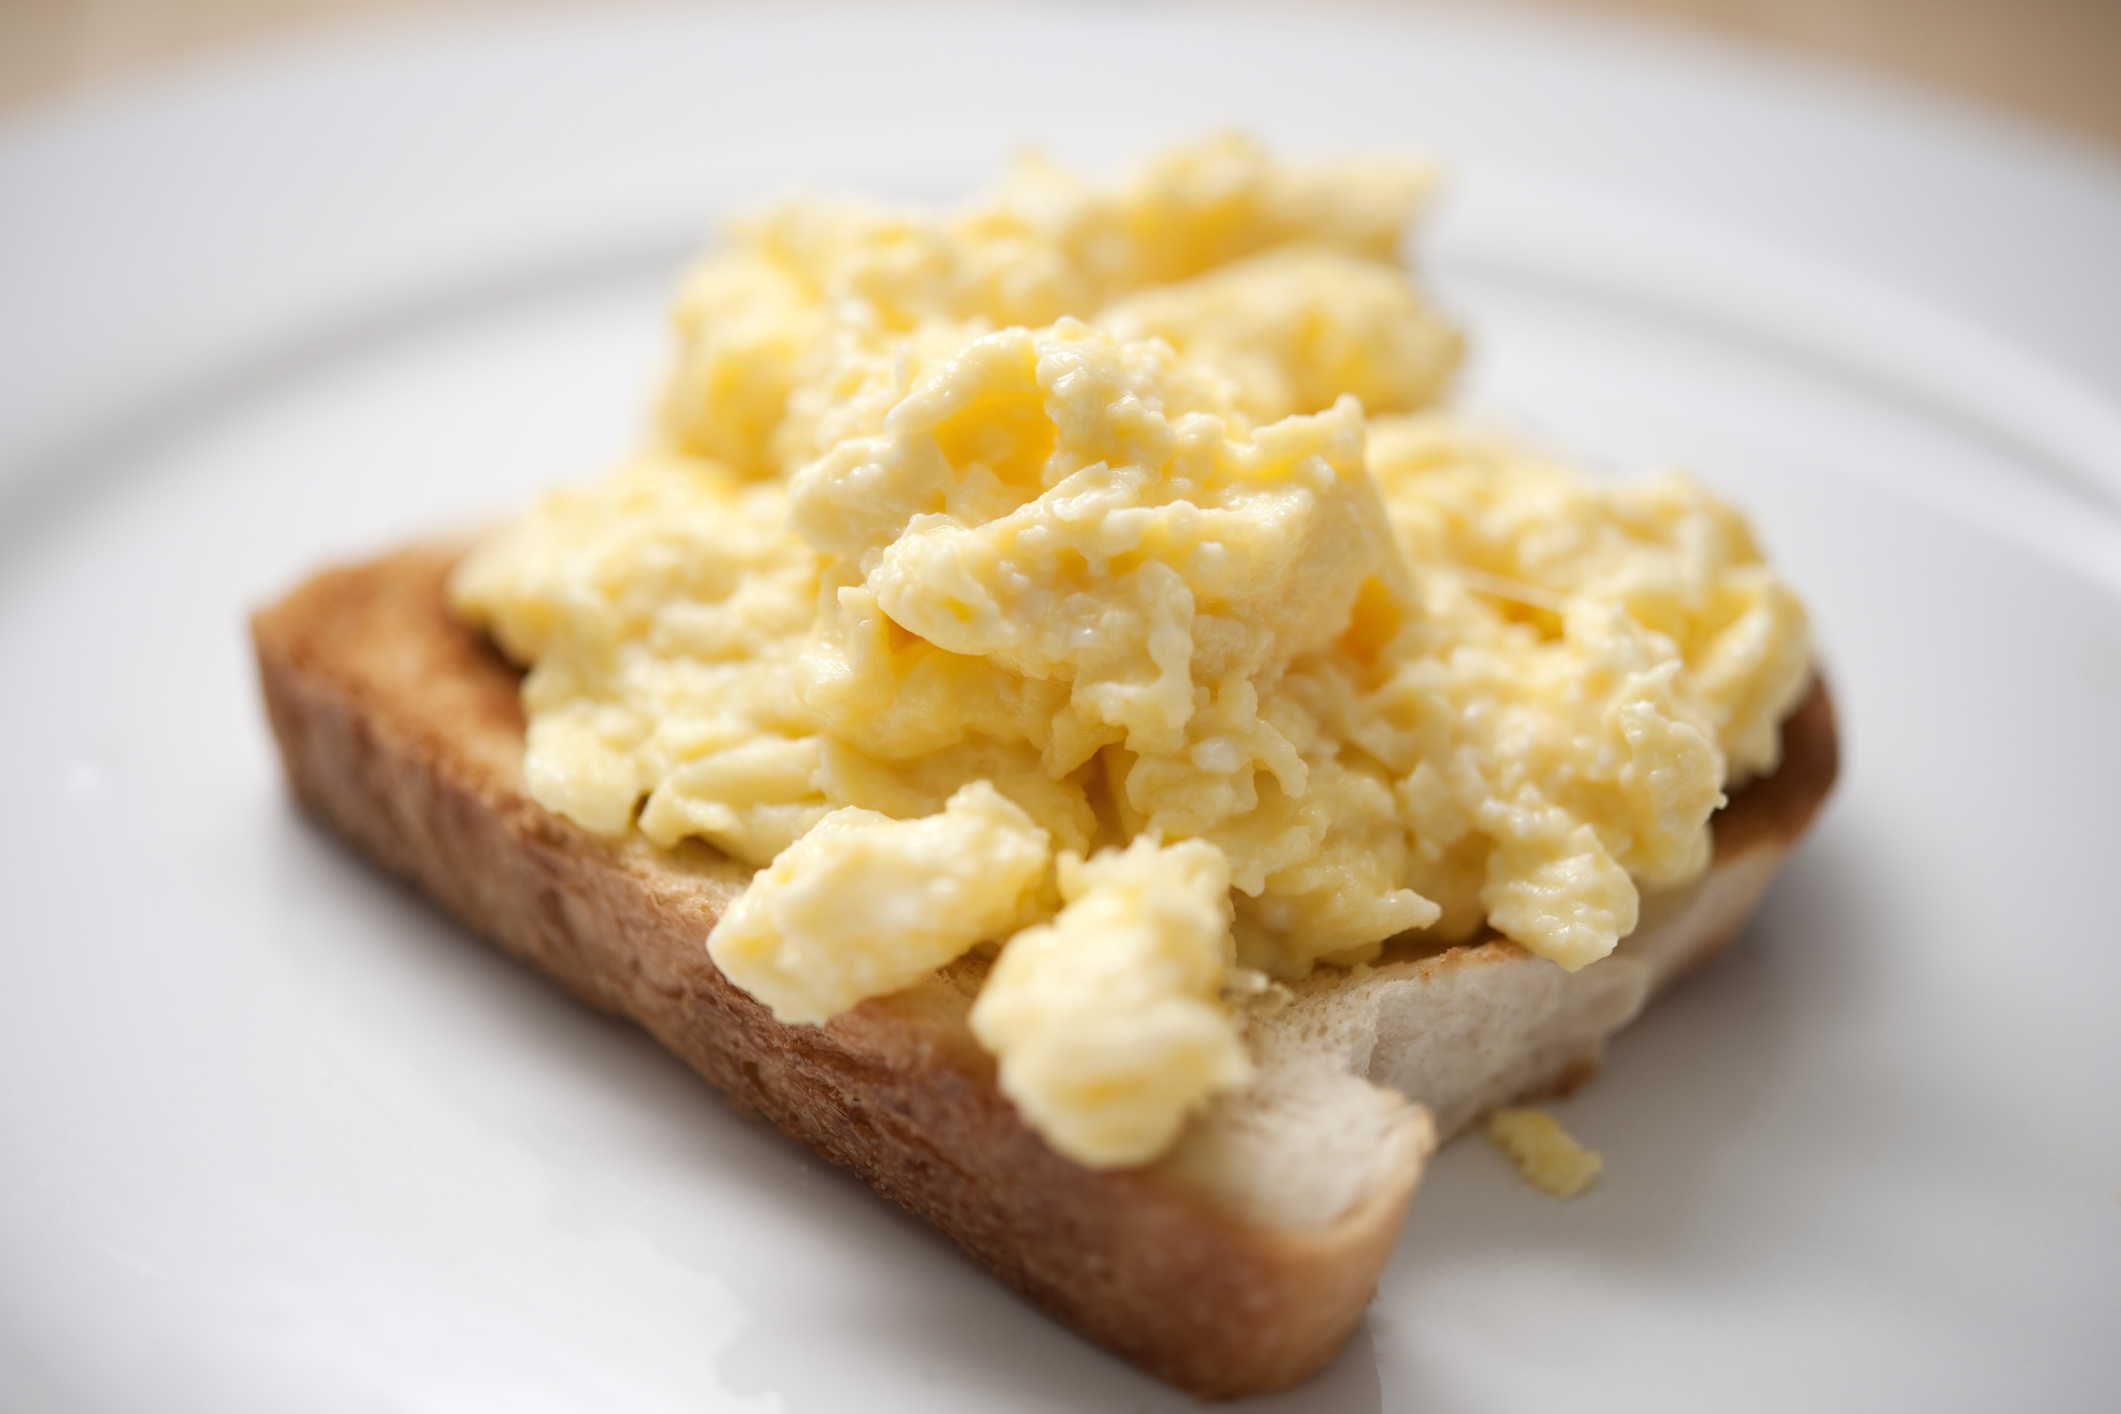 Scrambled eggs on toast served on a white plate